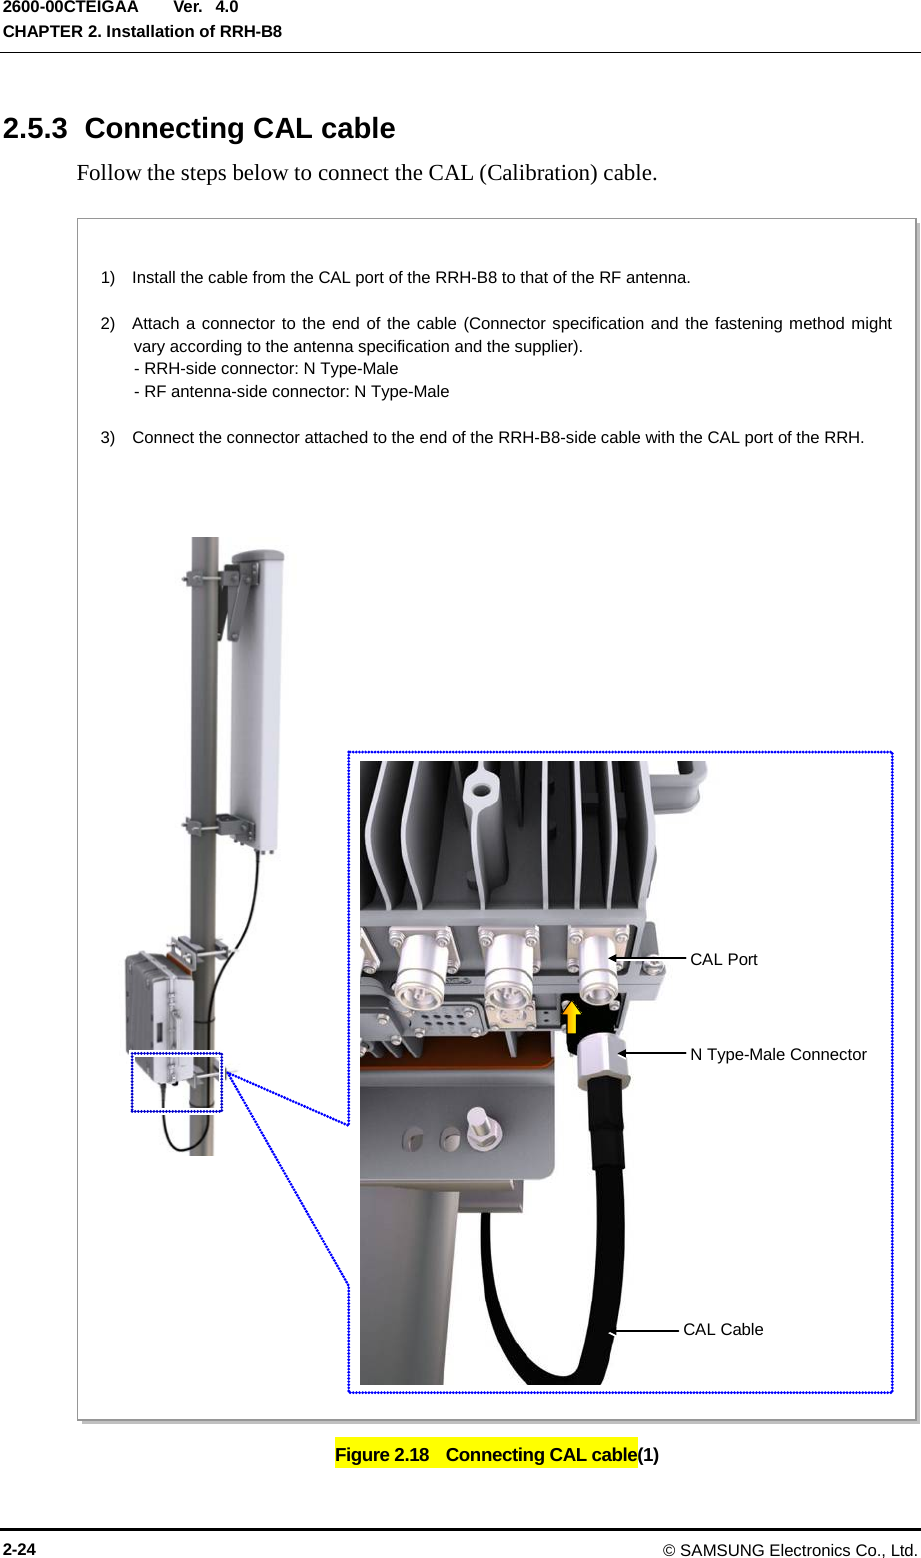  Ver.  CHAPTER 2. Installation of RRH-B8 2600-00CTEIGAA 4.0 2.5.3  Connecting CAL cable Follow the steps below to connect the CAL (Calibration) cable.  Figure 2.18   Connecting CAL cable(1)   1)  Install the cable from the CAL port of the RRH-B8 to that of the RF antenna.  2)  Attach a connector to the end of the cable (Connector specification and the fastening method might vary according to the antenna specification and the supplier).     - RRH-side connector: N Type-Male     - RF antenna-side connector: N Type-Male  3)    Connect the connector attached to the end of the RRH-B8-side cable with the CAL port of the RRH.    CAL Cable CAL Port N Type-Male Connector 2-24 © SAMSUNG Electronics Co., Ltd. 